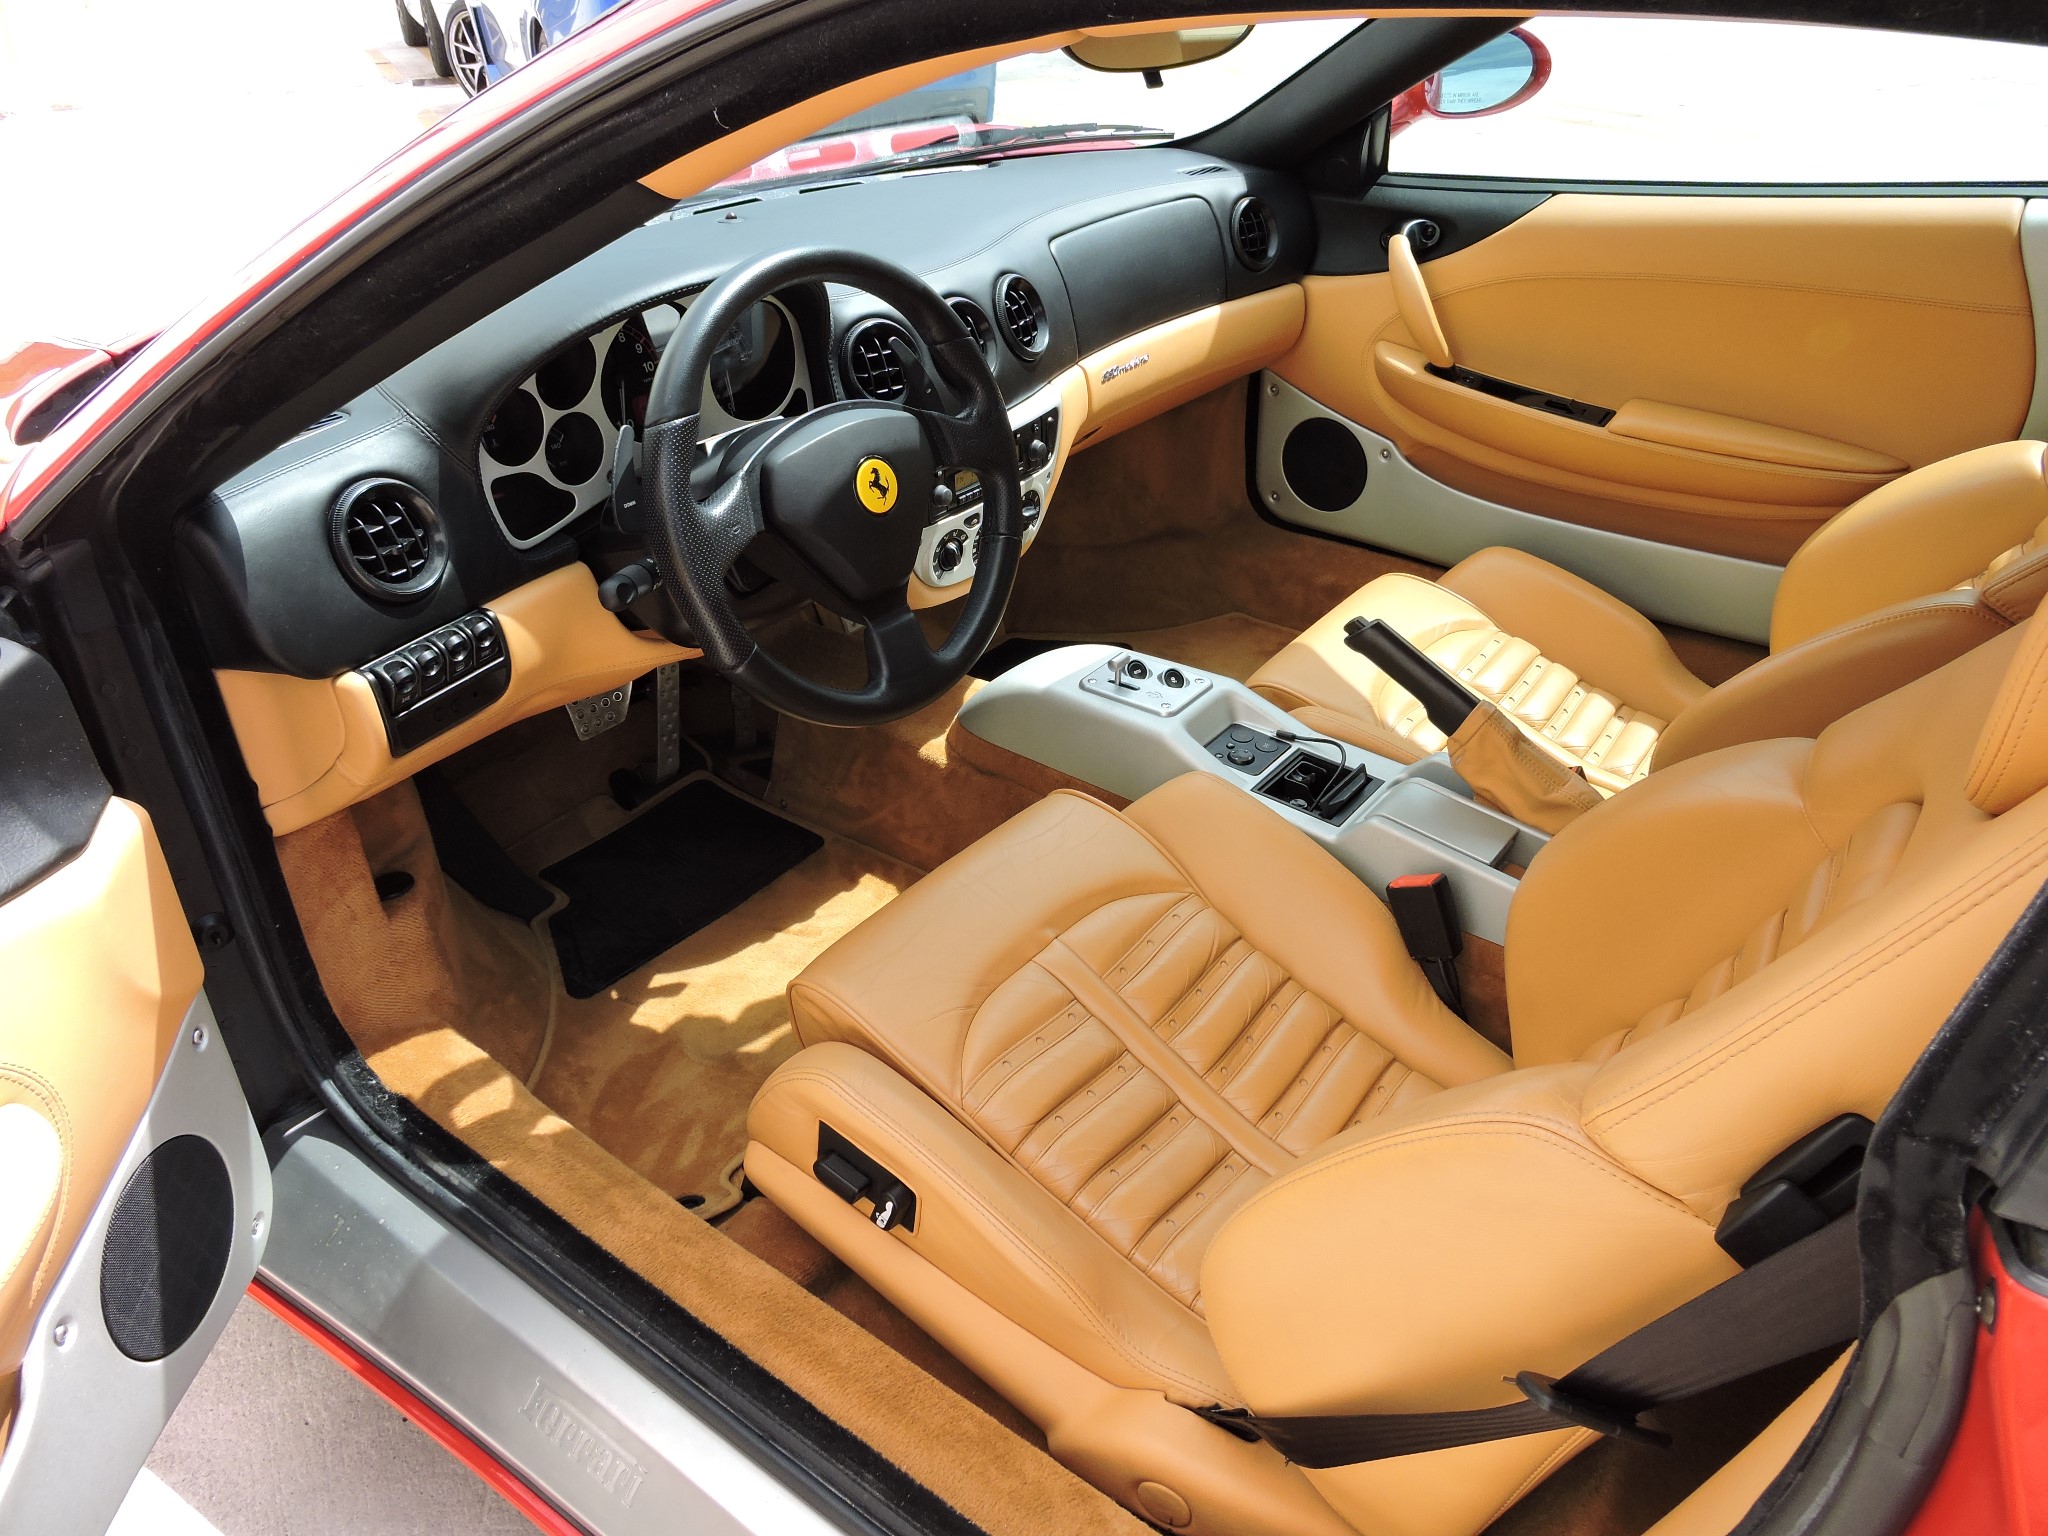 The ergonomics of the interior are near faultless. The design is tasteful, comfortable, and confidence inspiring.